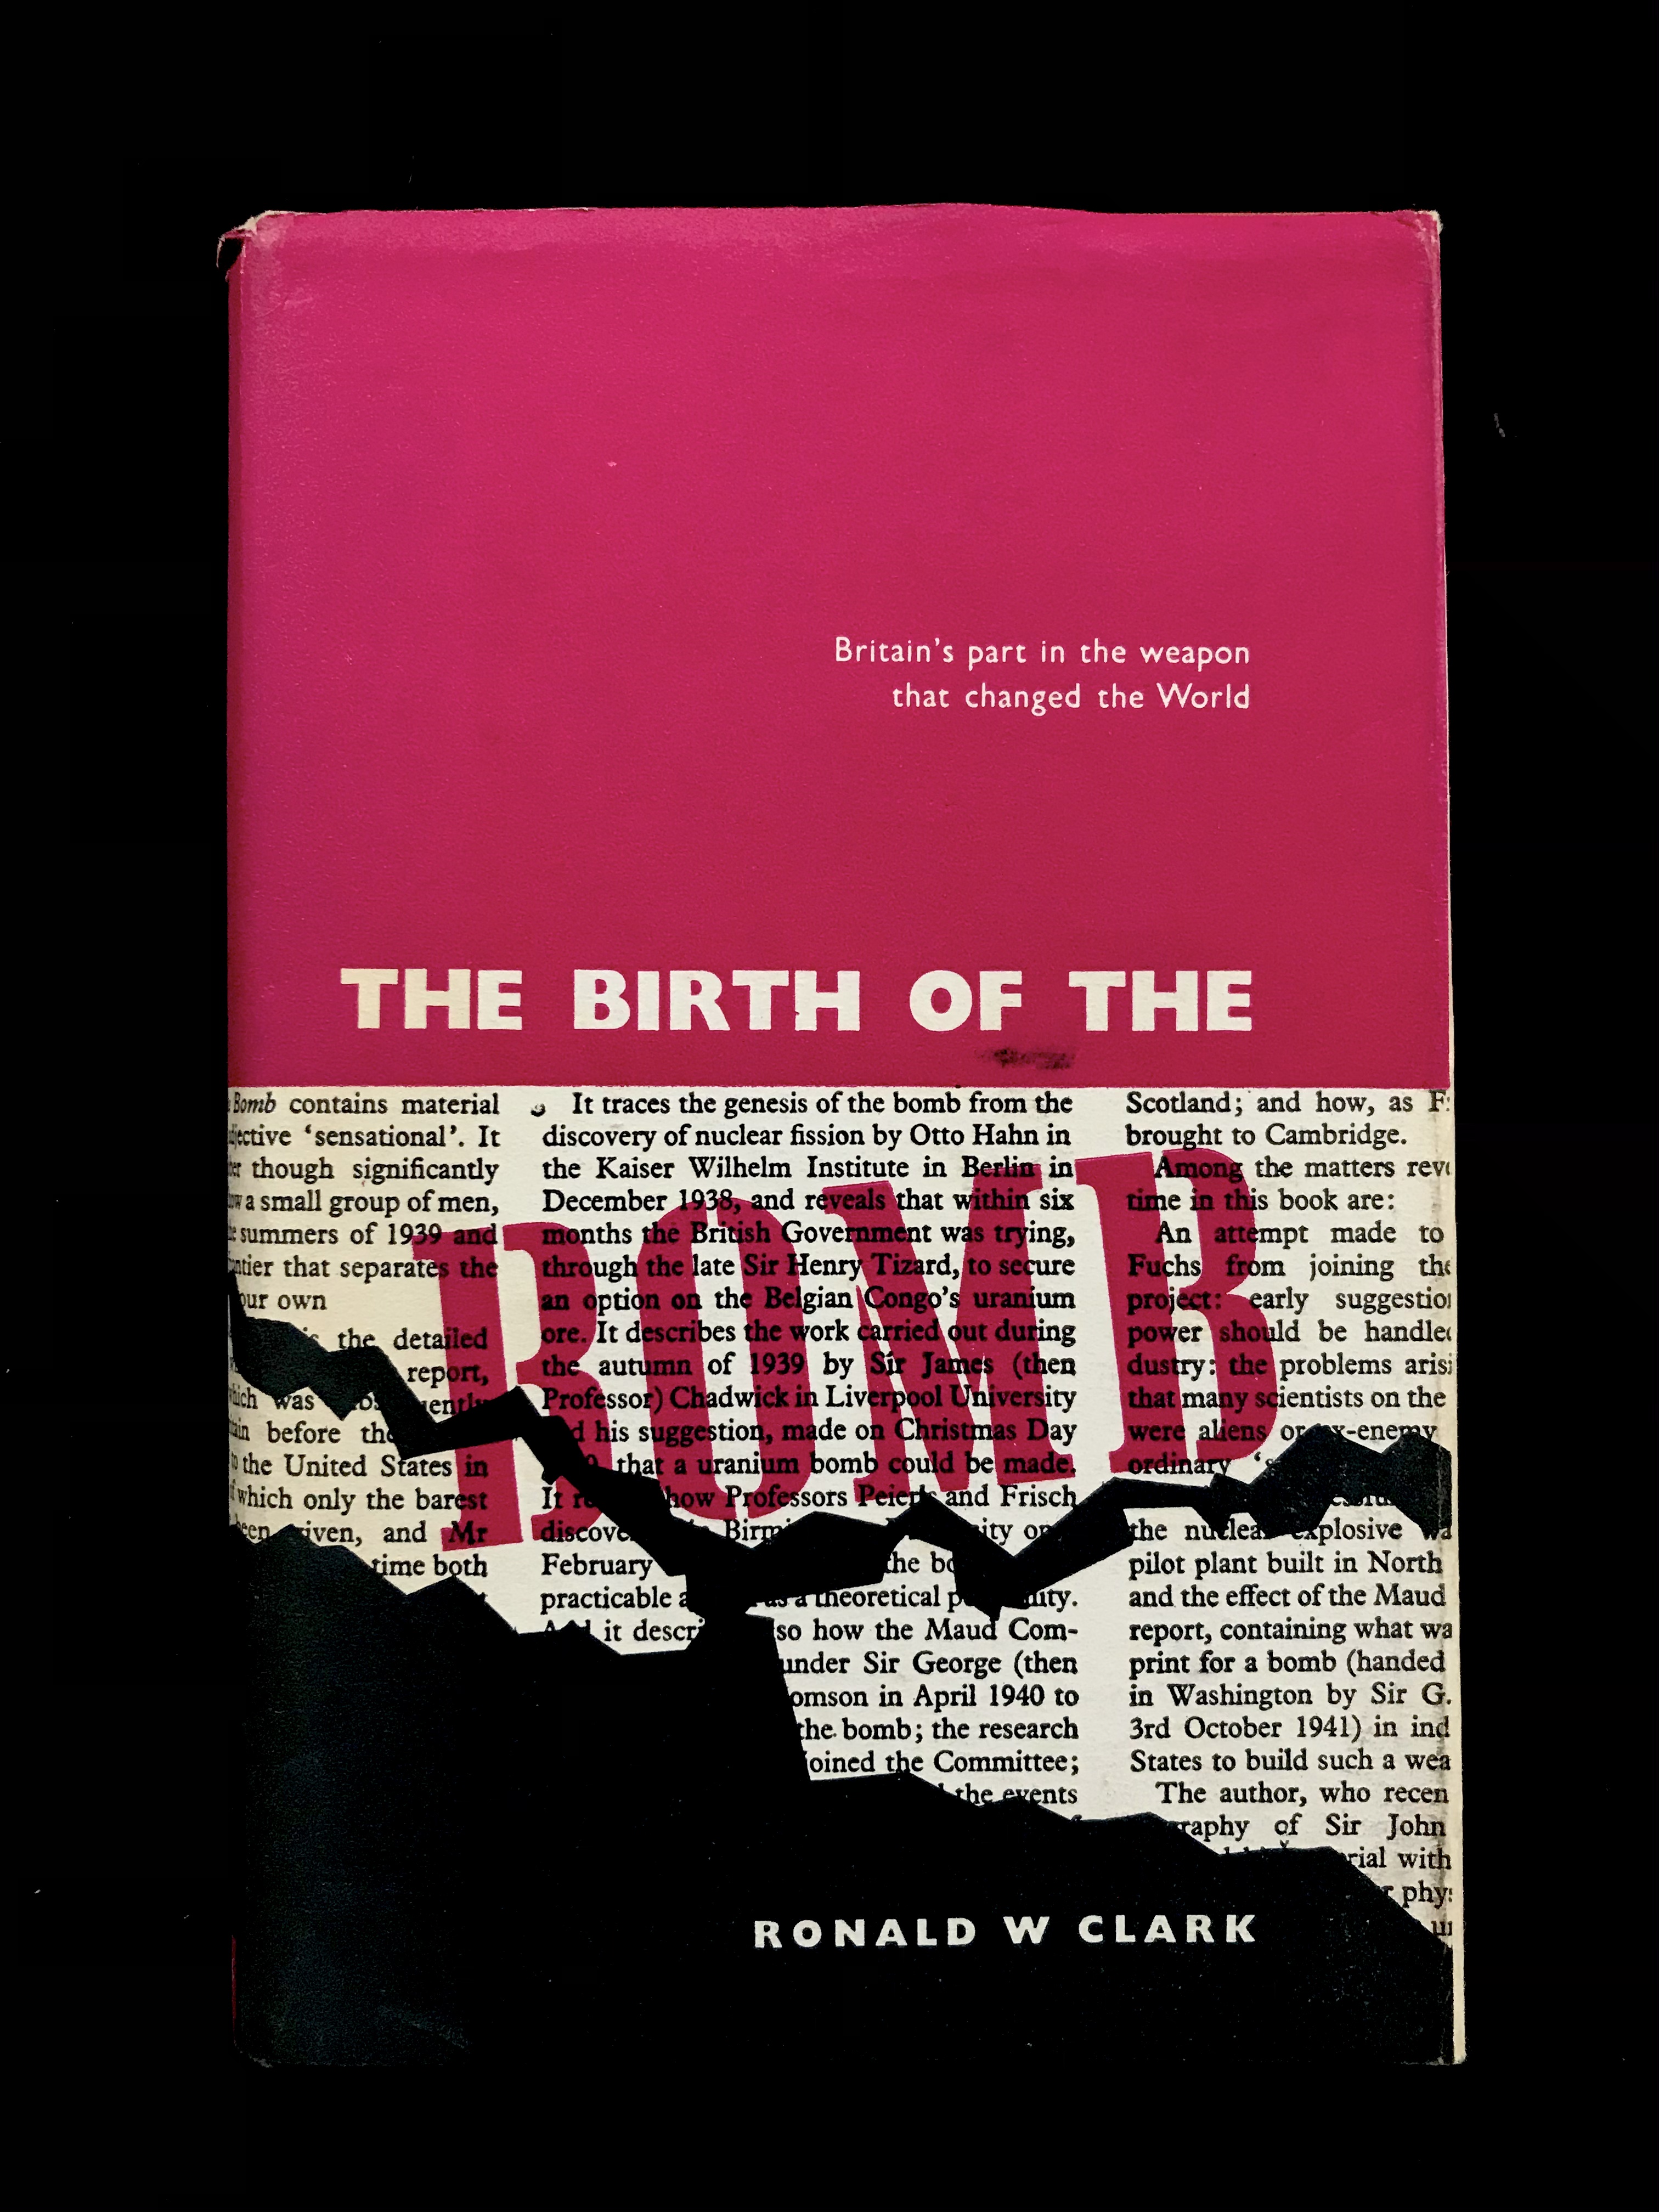 The Birth Of The Bomb by Ronald W Clark